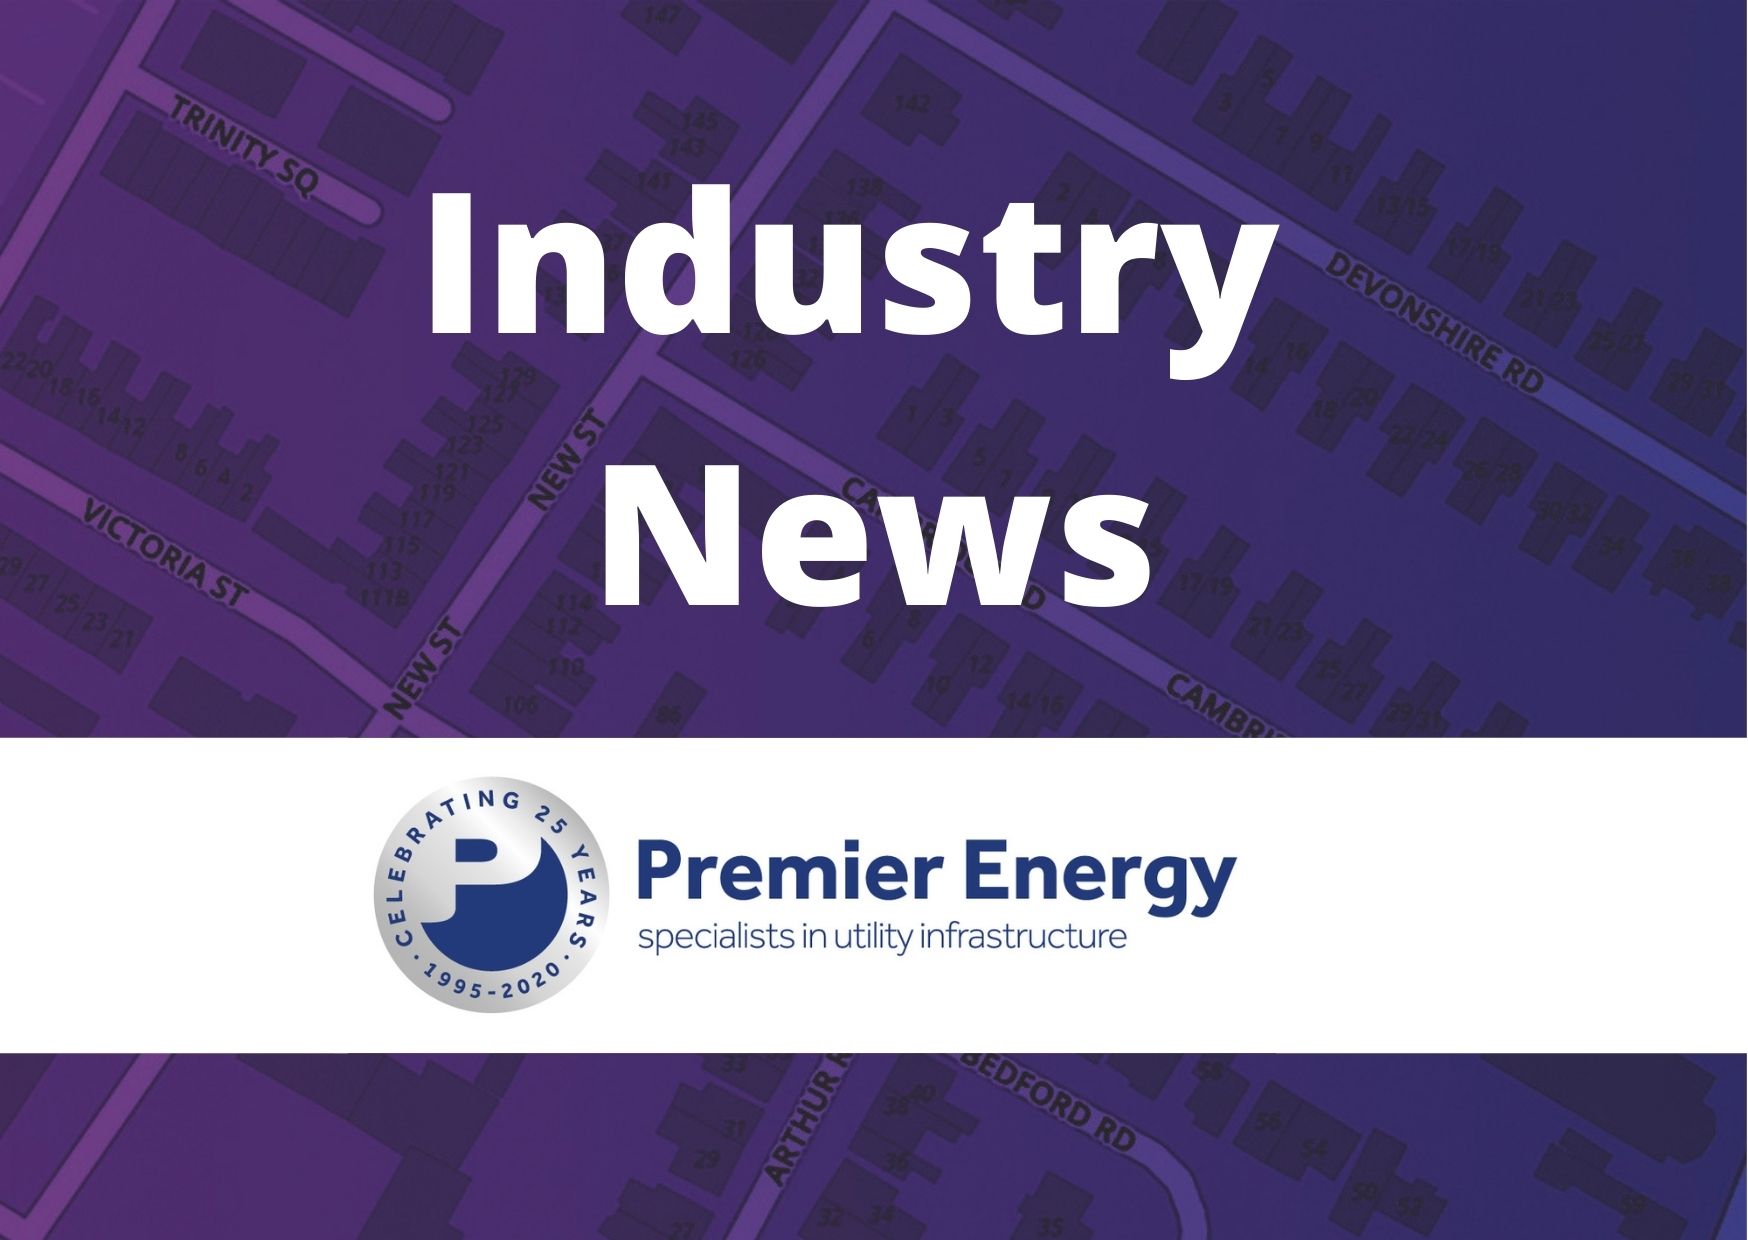 Industry News image